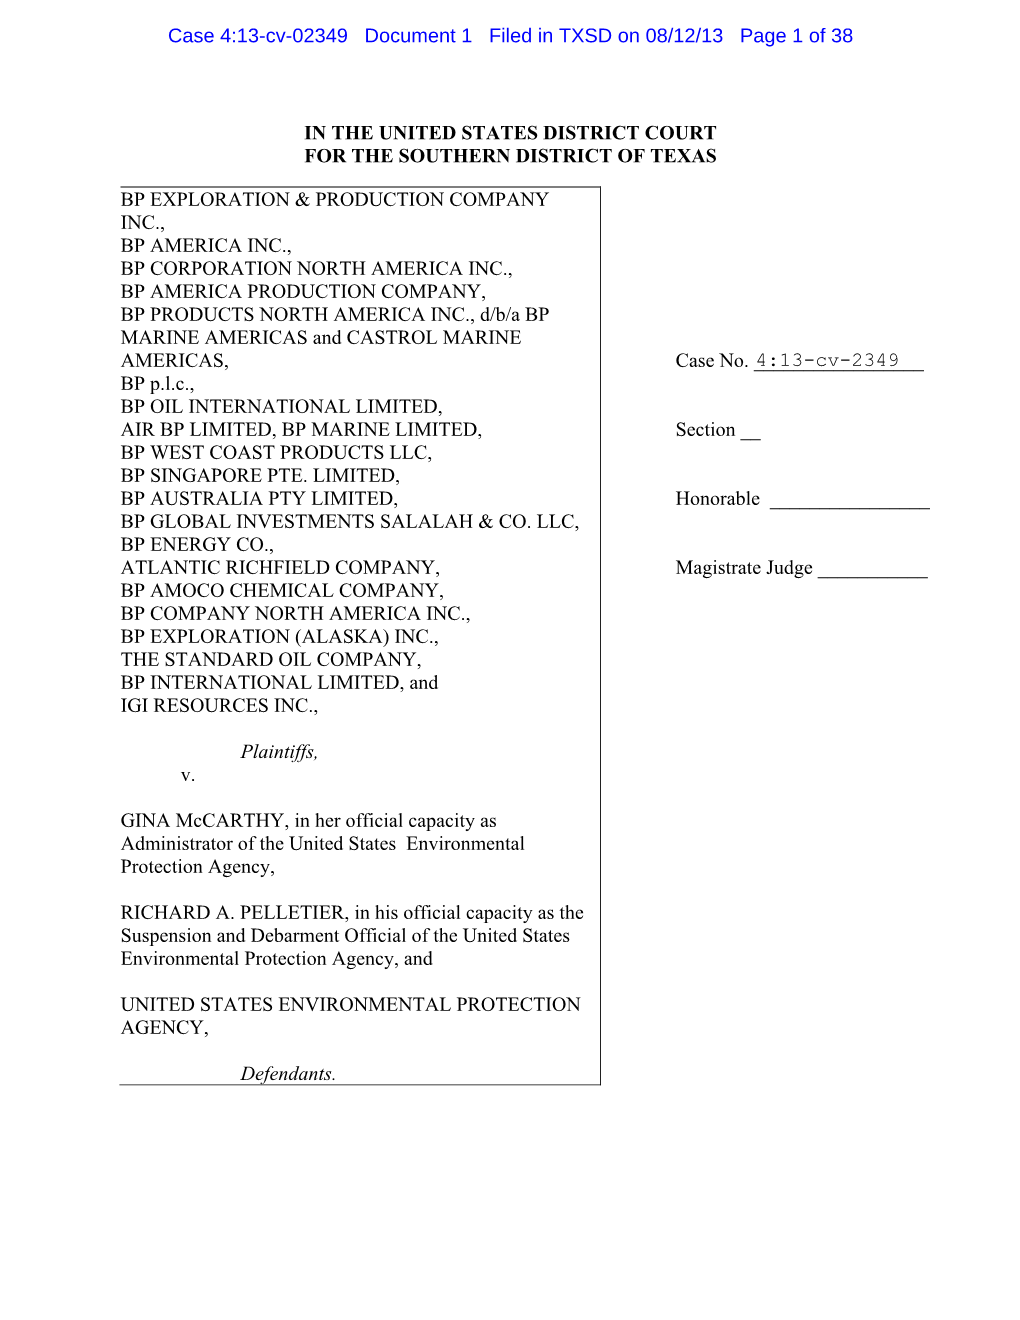 Case 4:13-Cv-02349 Document 1 Filed in TXSD on 08/12/13 Page 1 of 38